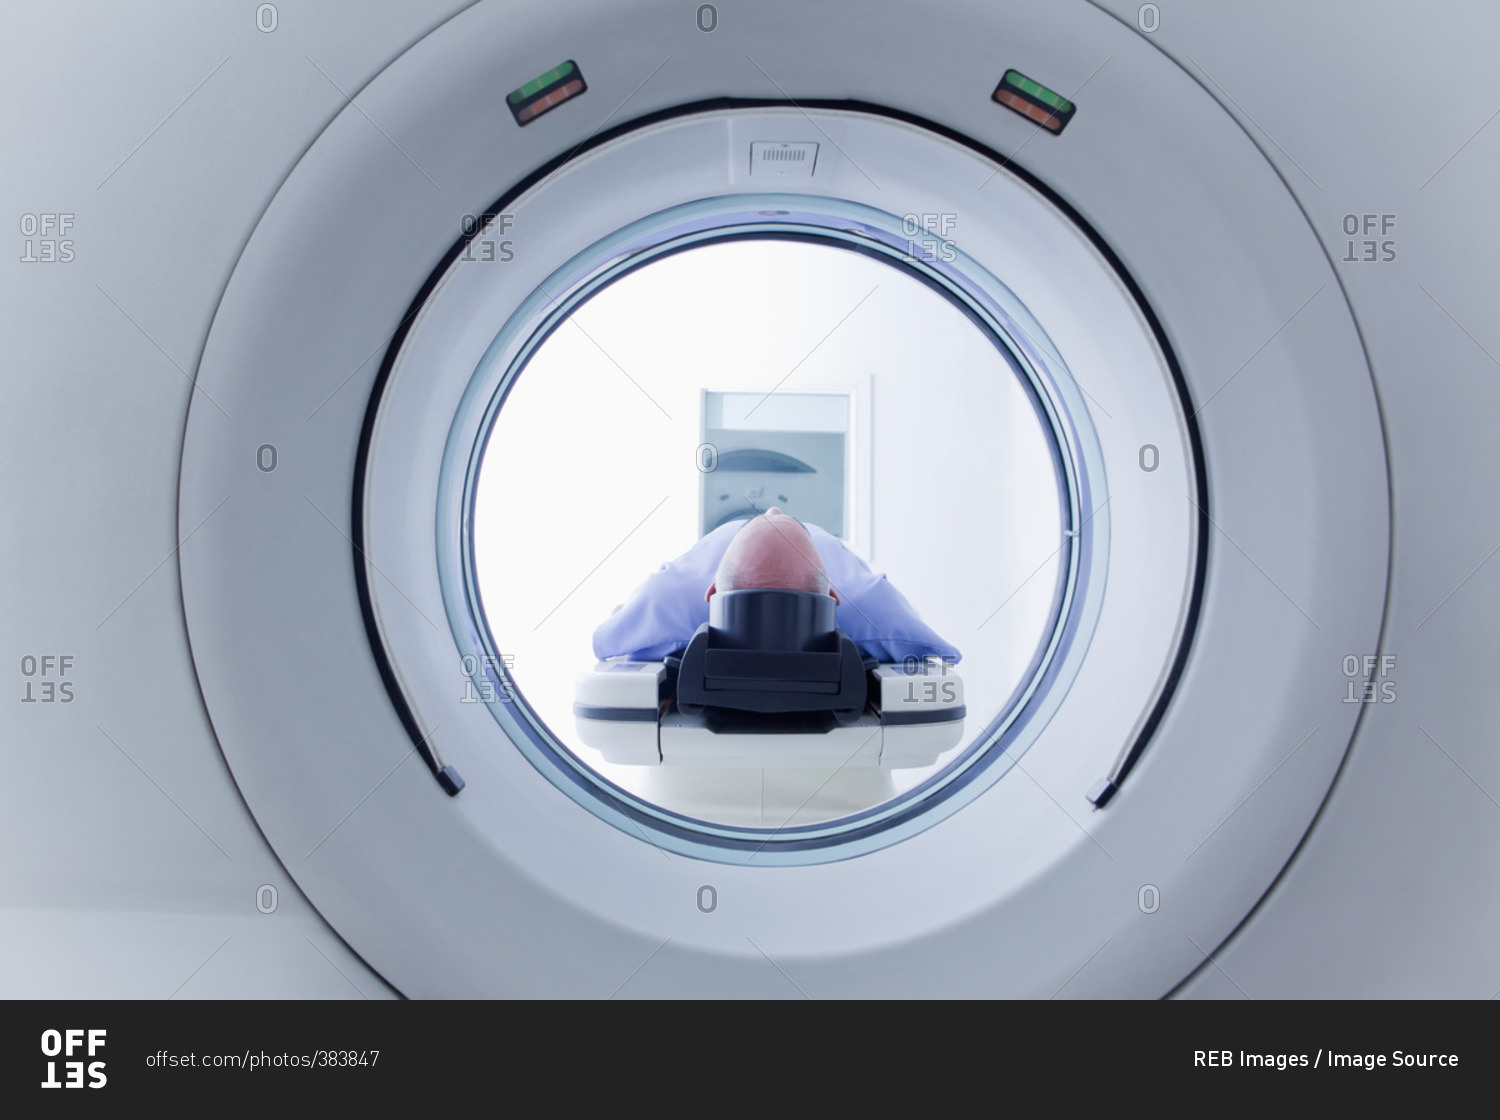 Patient lying down on CT scanner